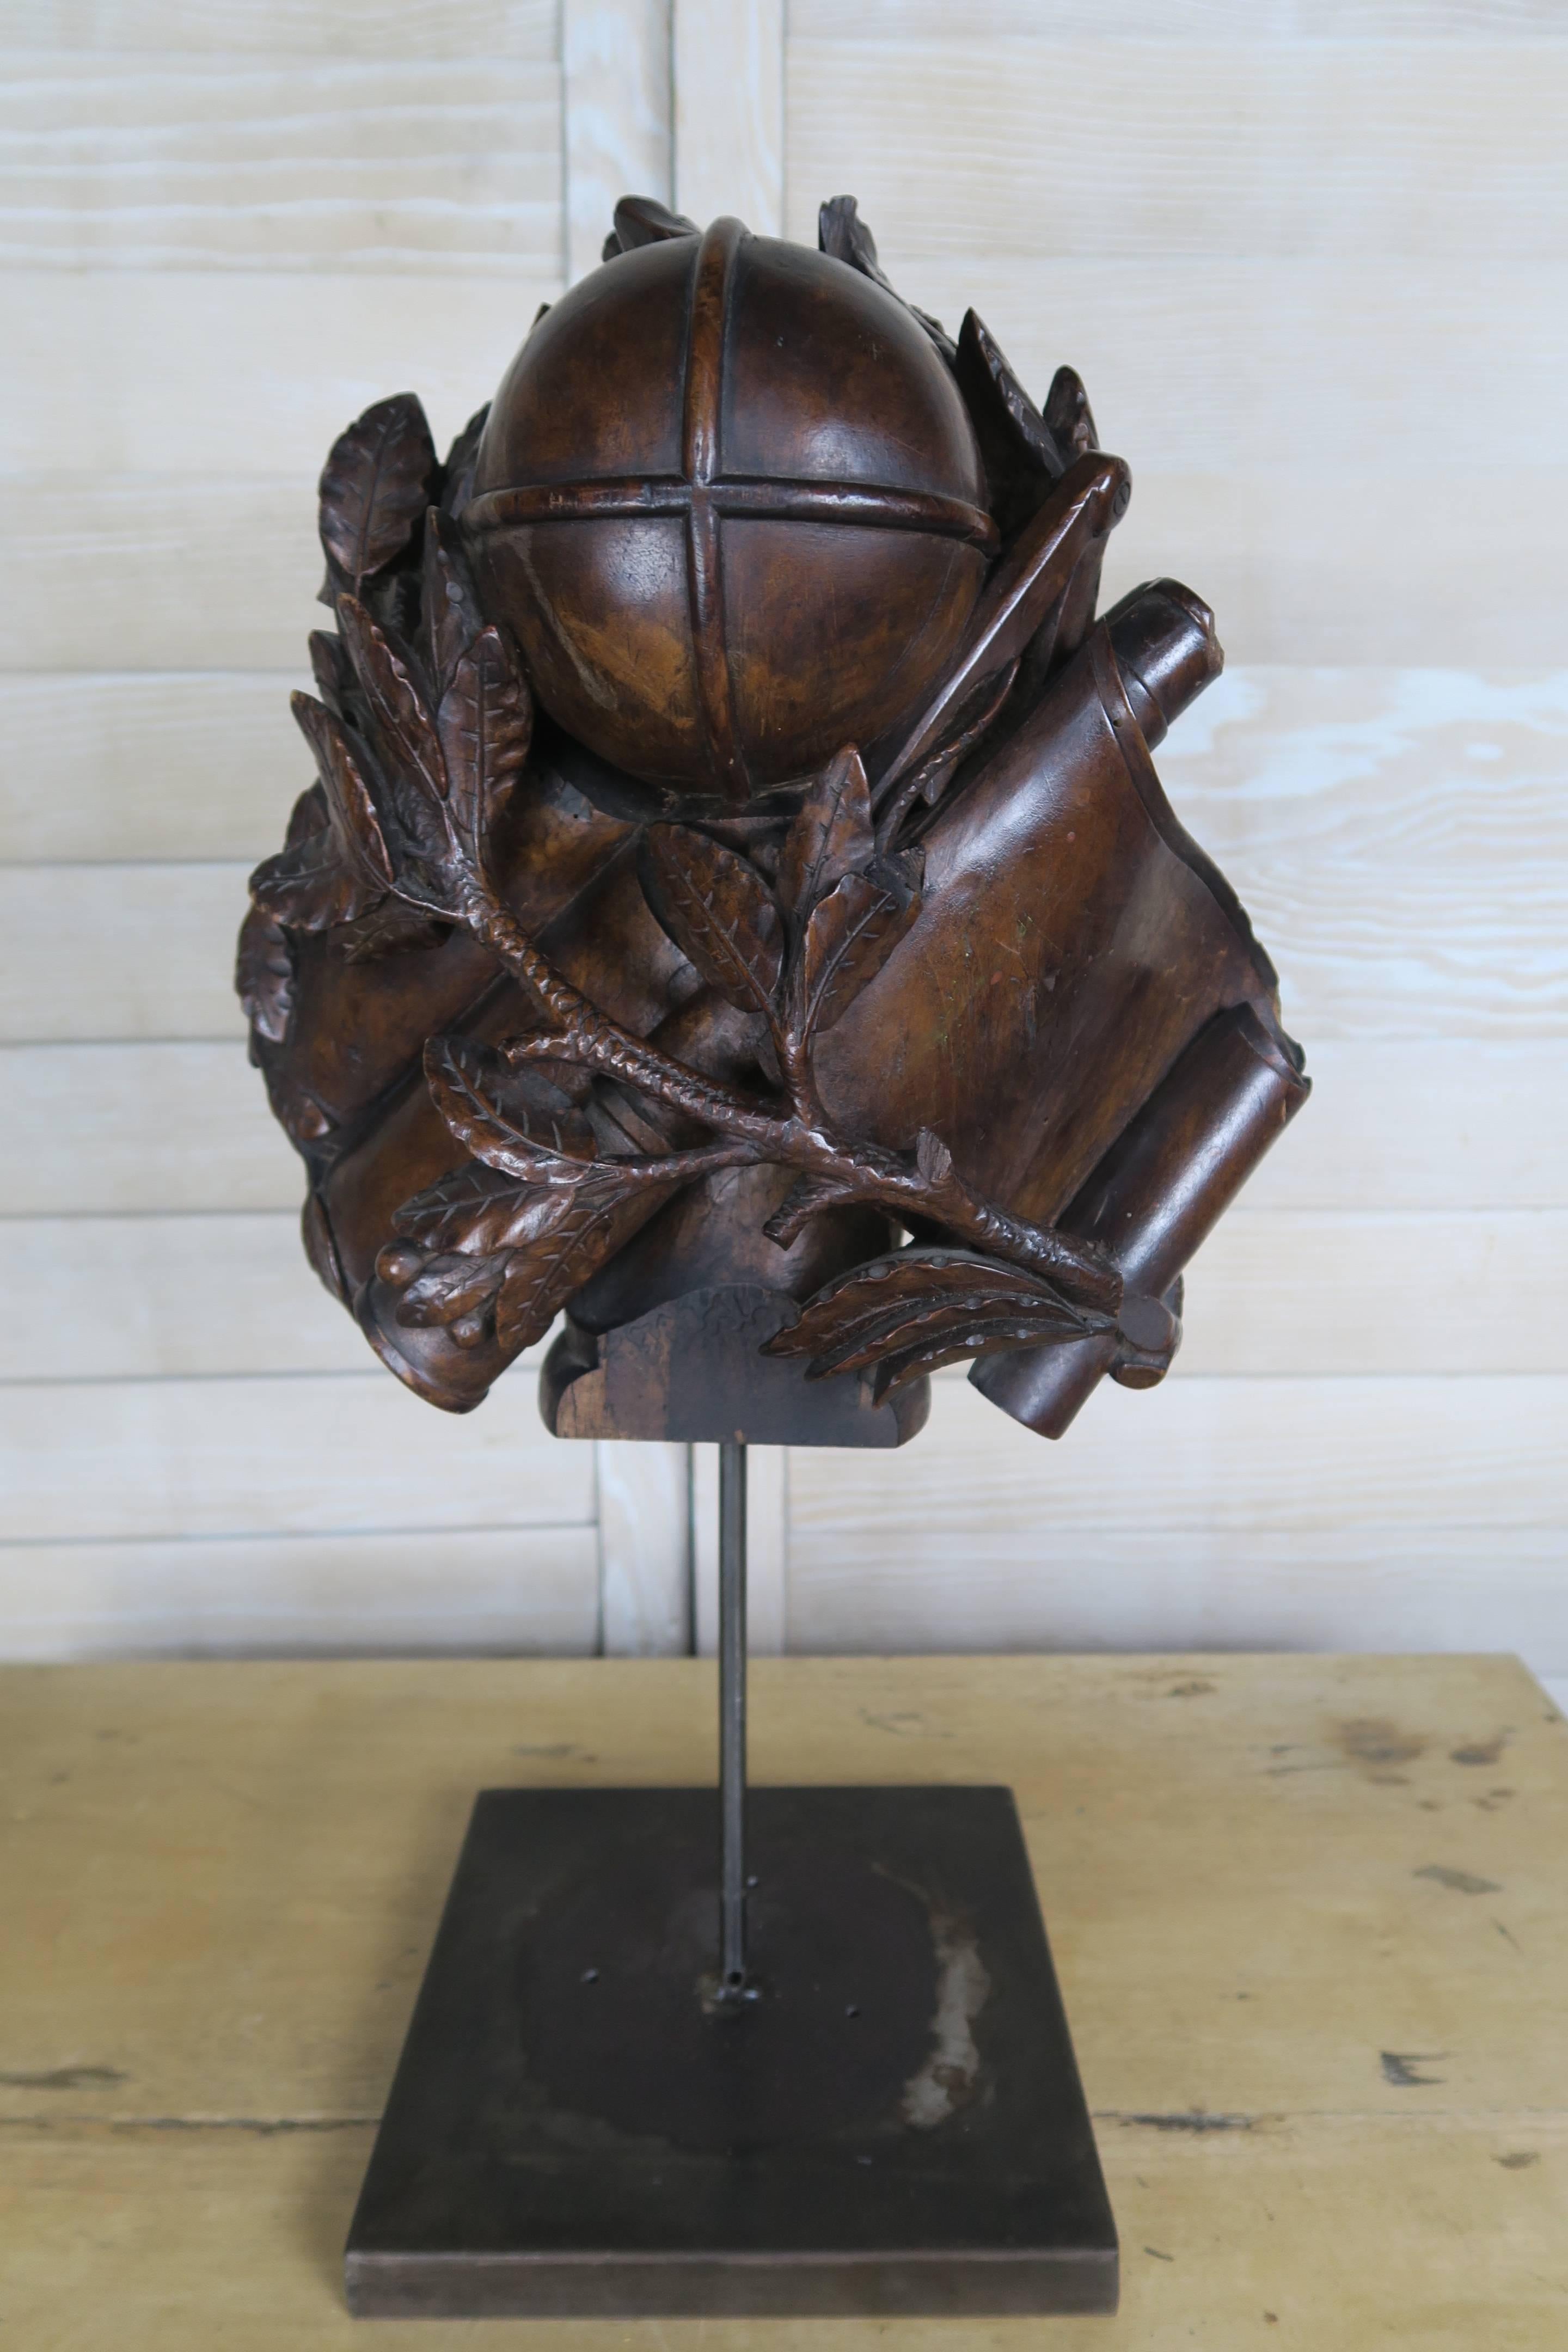 19th century hand-carved walnut remnant depicting a sphere surrounded by oak leaves and scrolls. The antique piece has been mounted on an iron base that measures 9